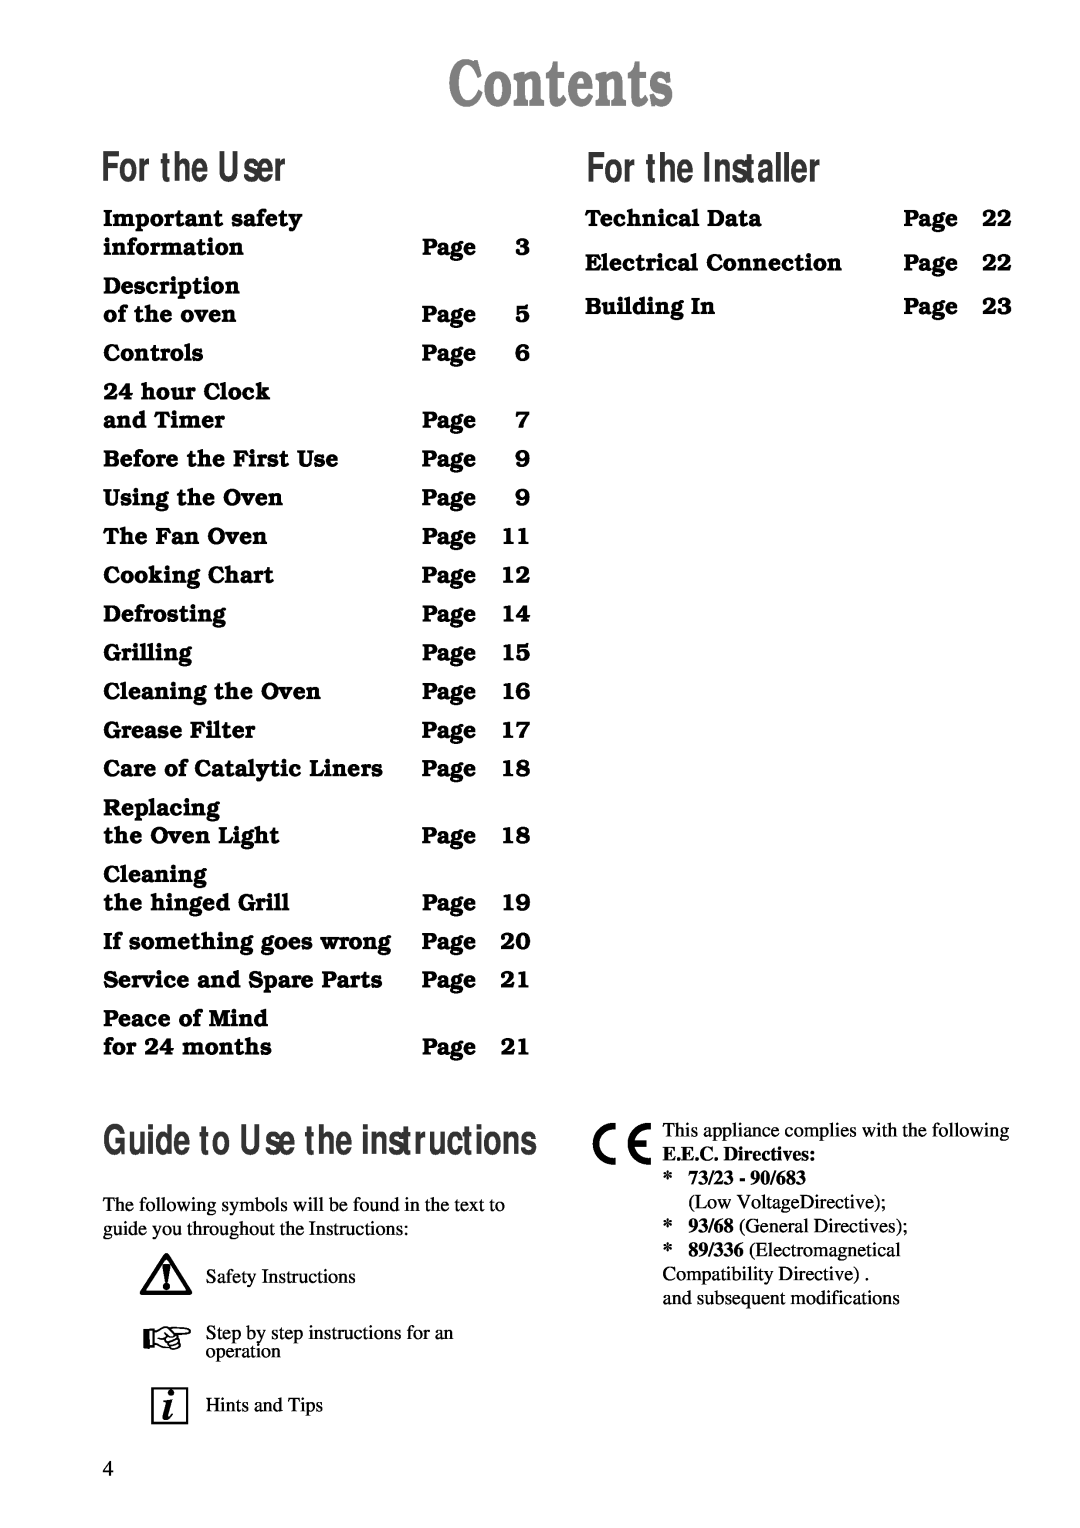 Zanussi ZBF 863 manual Contents, For the User, For the Installer, Guide to Use the instructions 